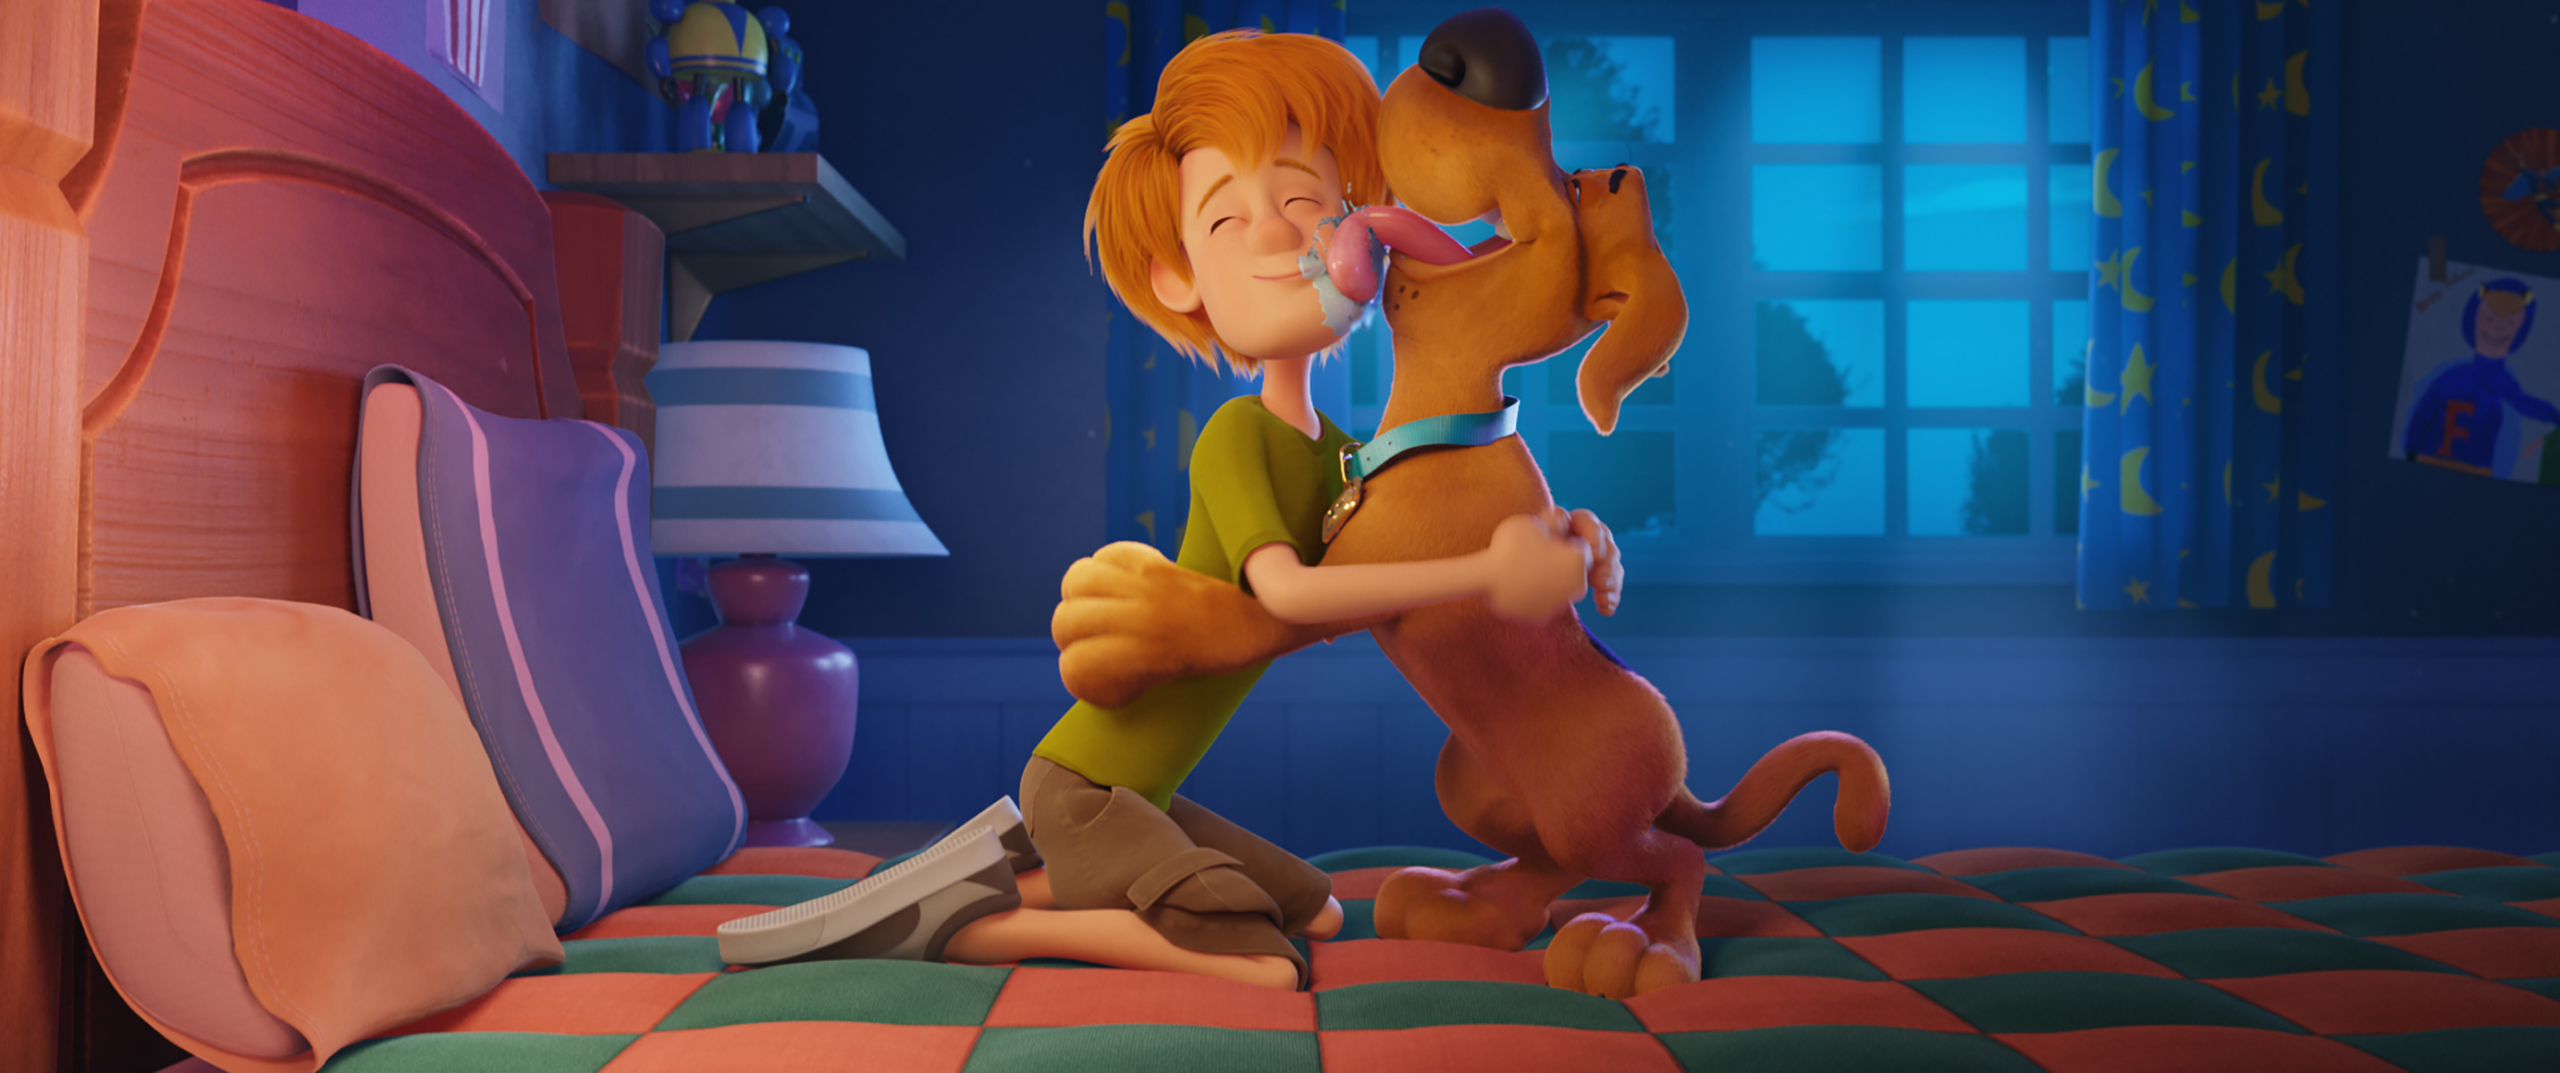 Scooby film 2020 streaming on demand